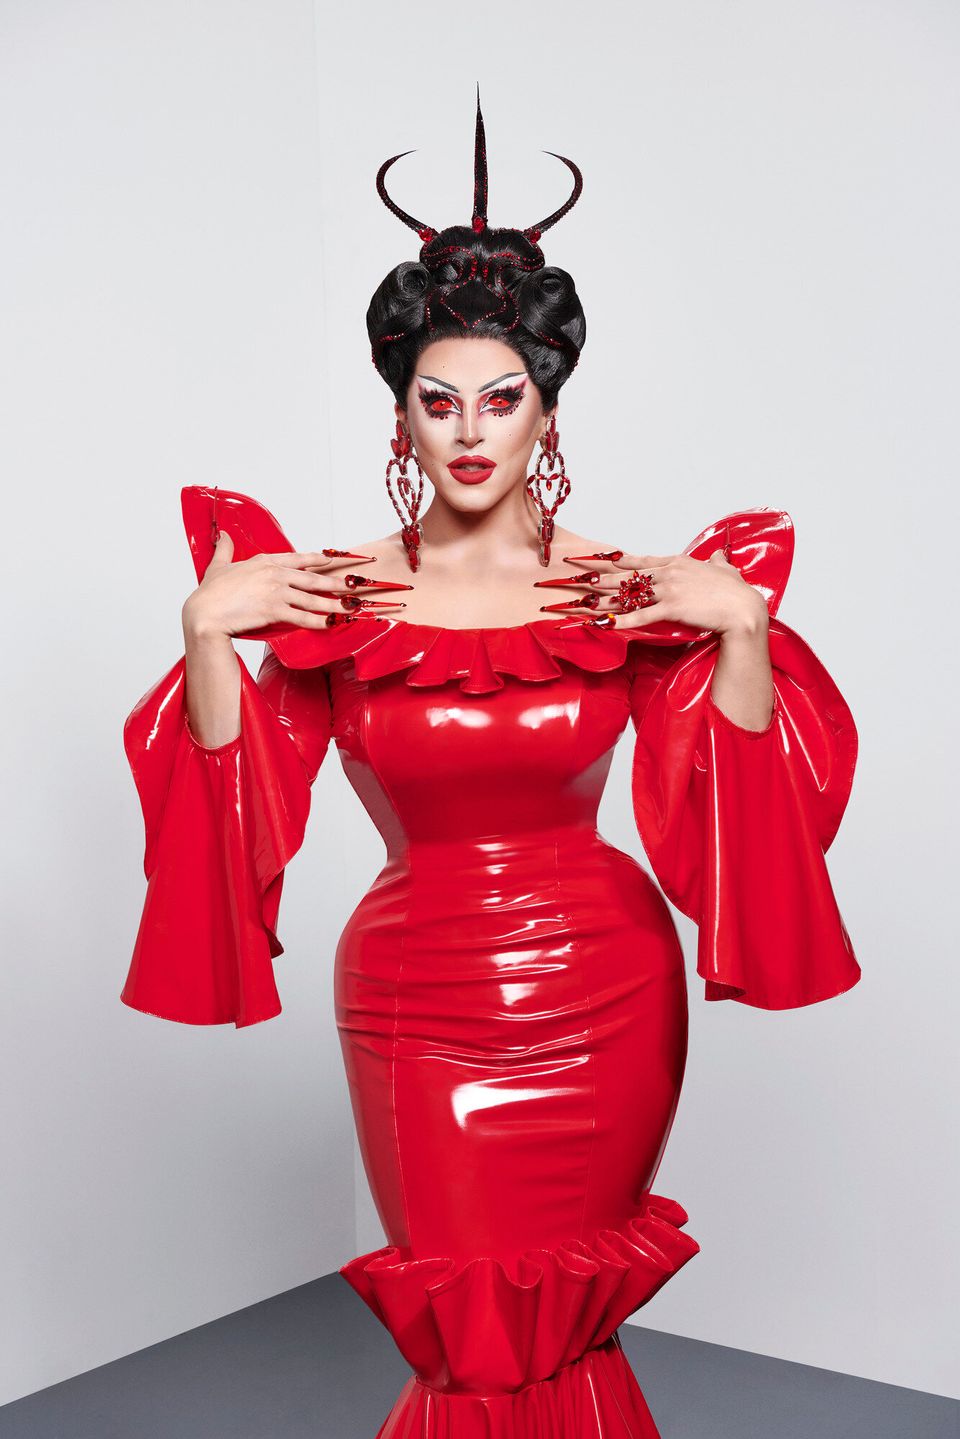 Cherry says her drag is more 